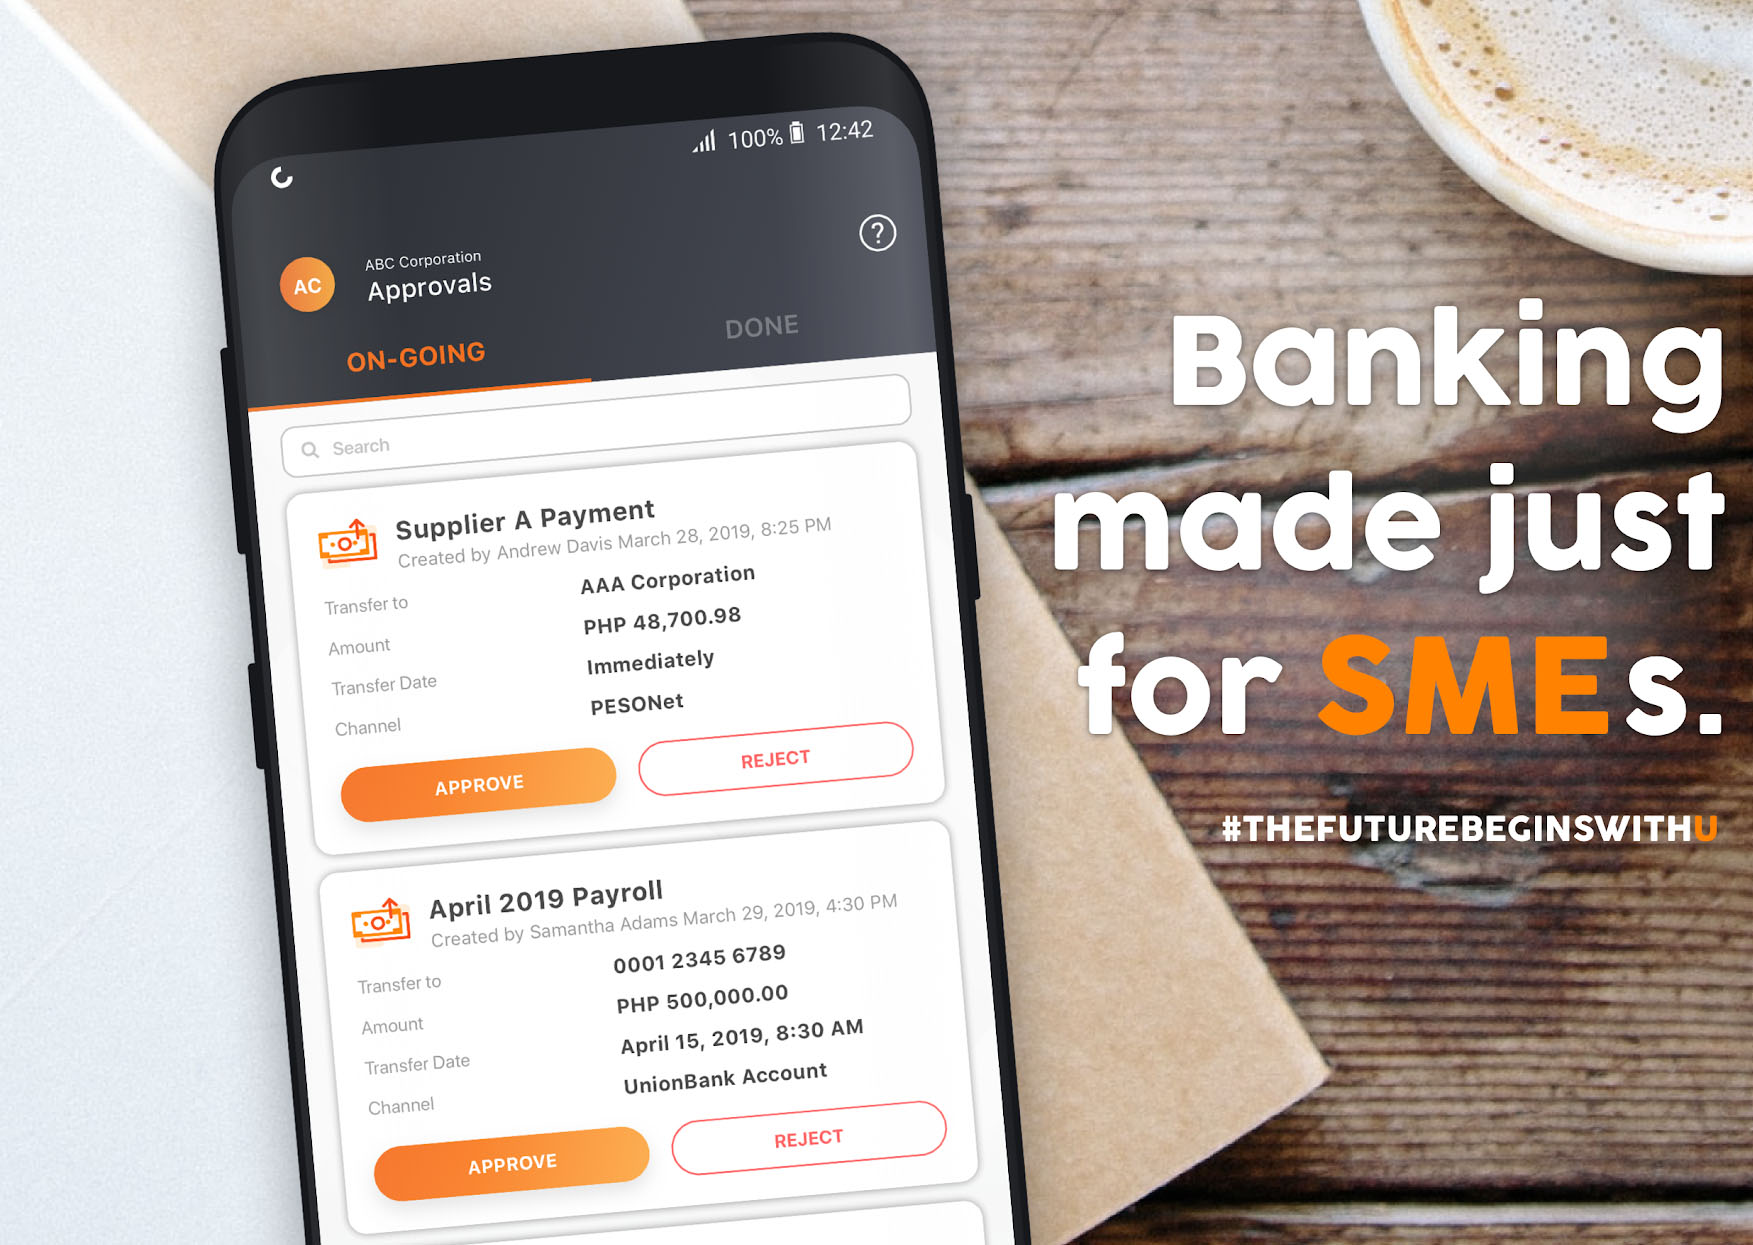 UnionBank SME Business Banking App empowers SMEs in the new digital normal to manage financial operations